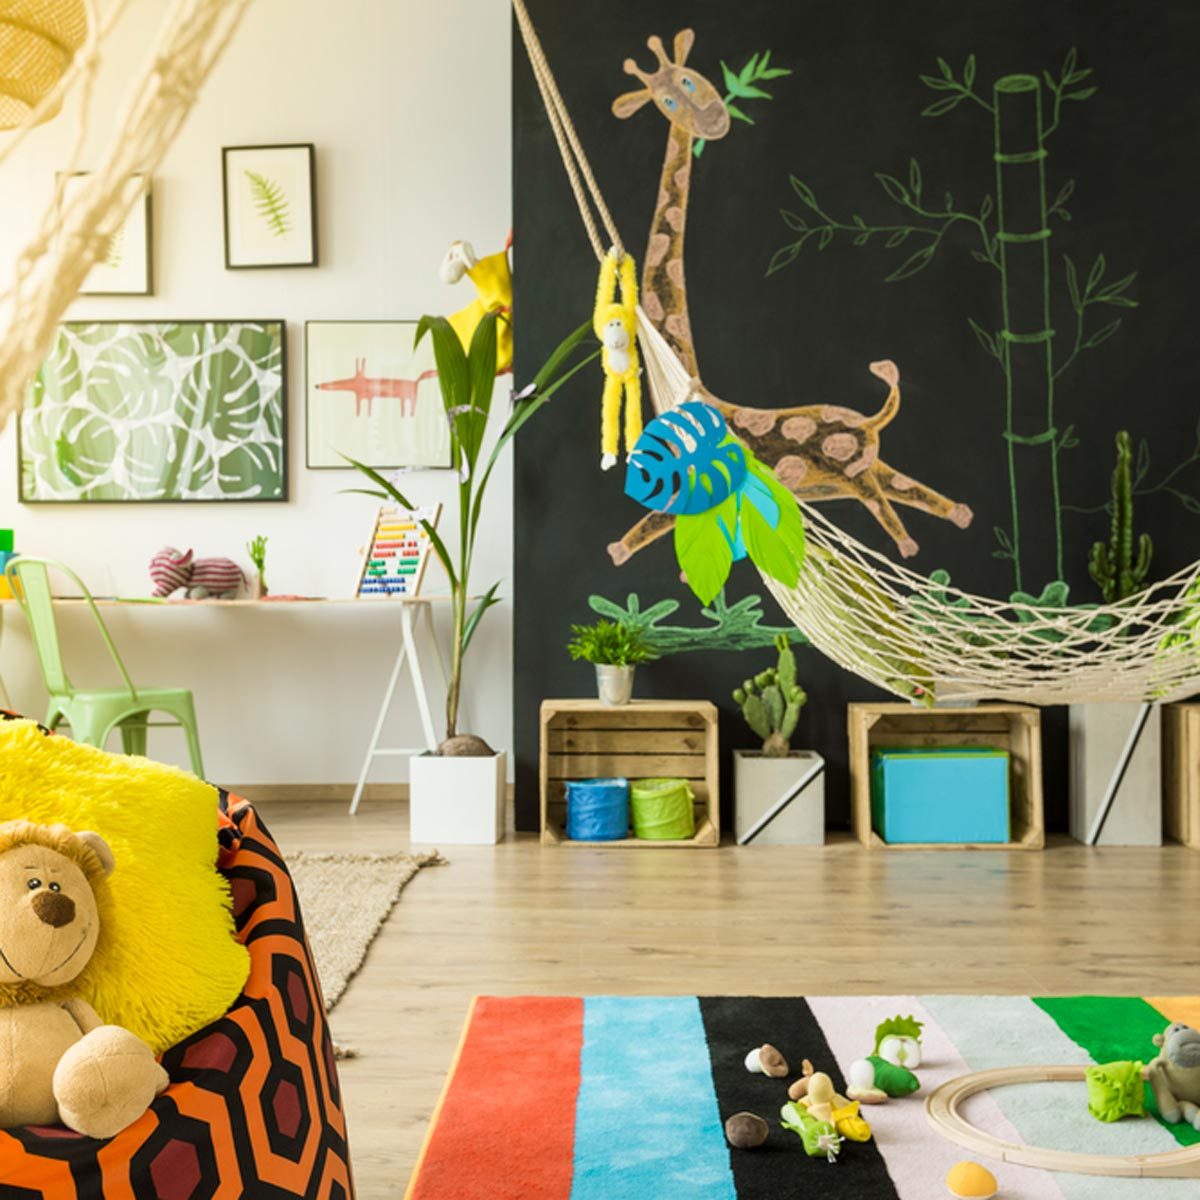 12 Super Cool Kids Room Ideas You've Got to See! | Family Handyman